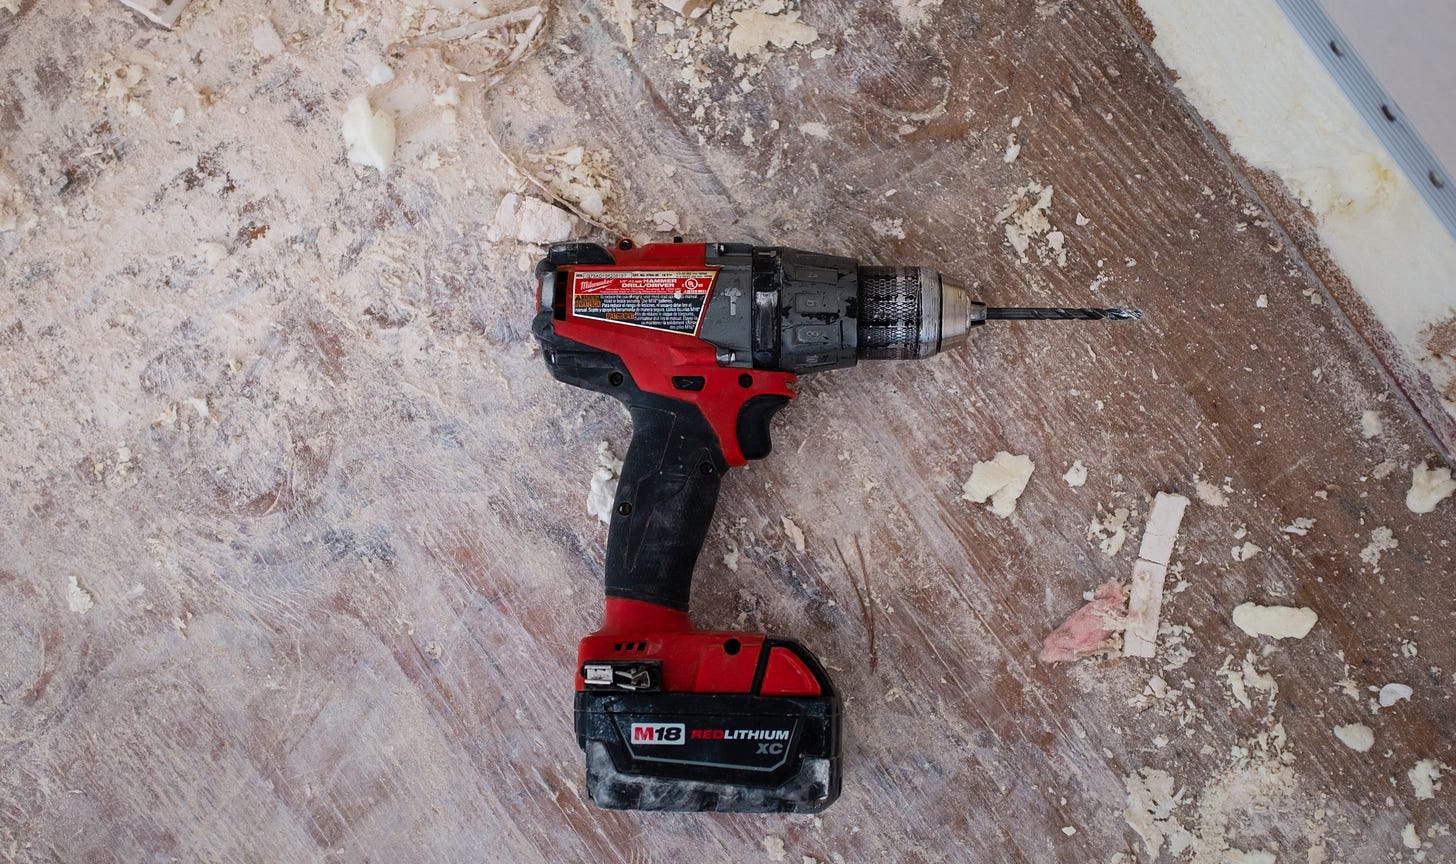 A handheld cordless electric drill on the ground of a construction site